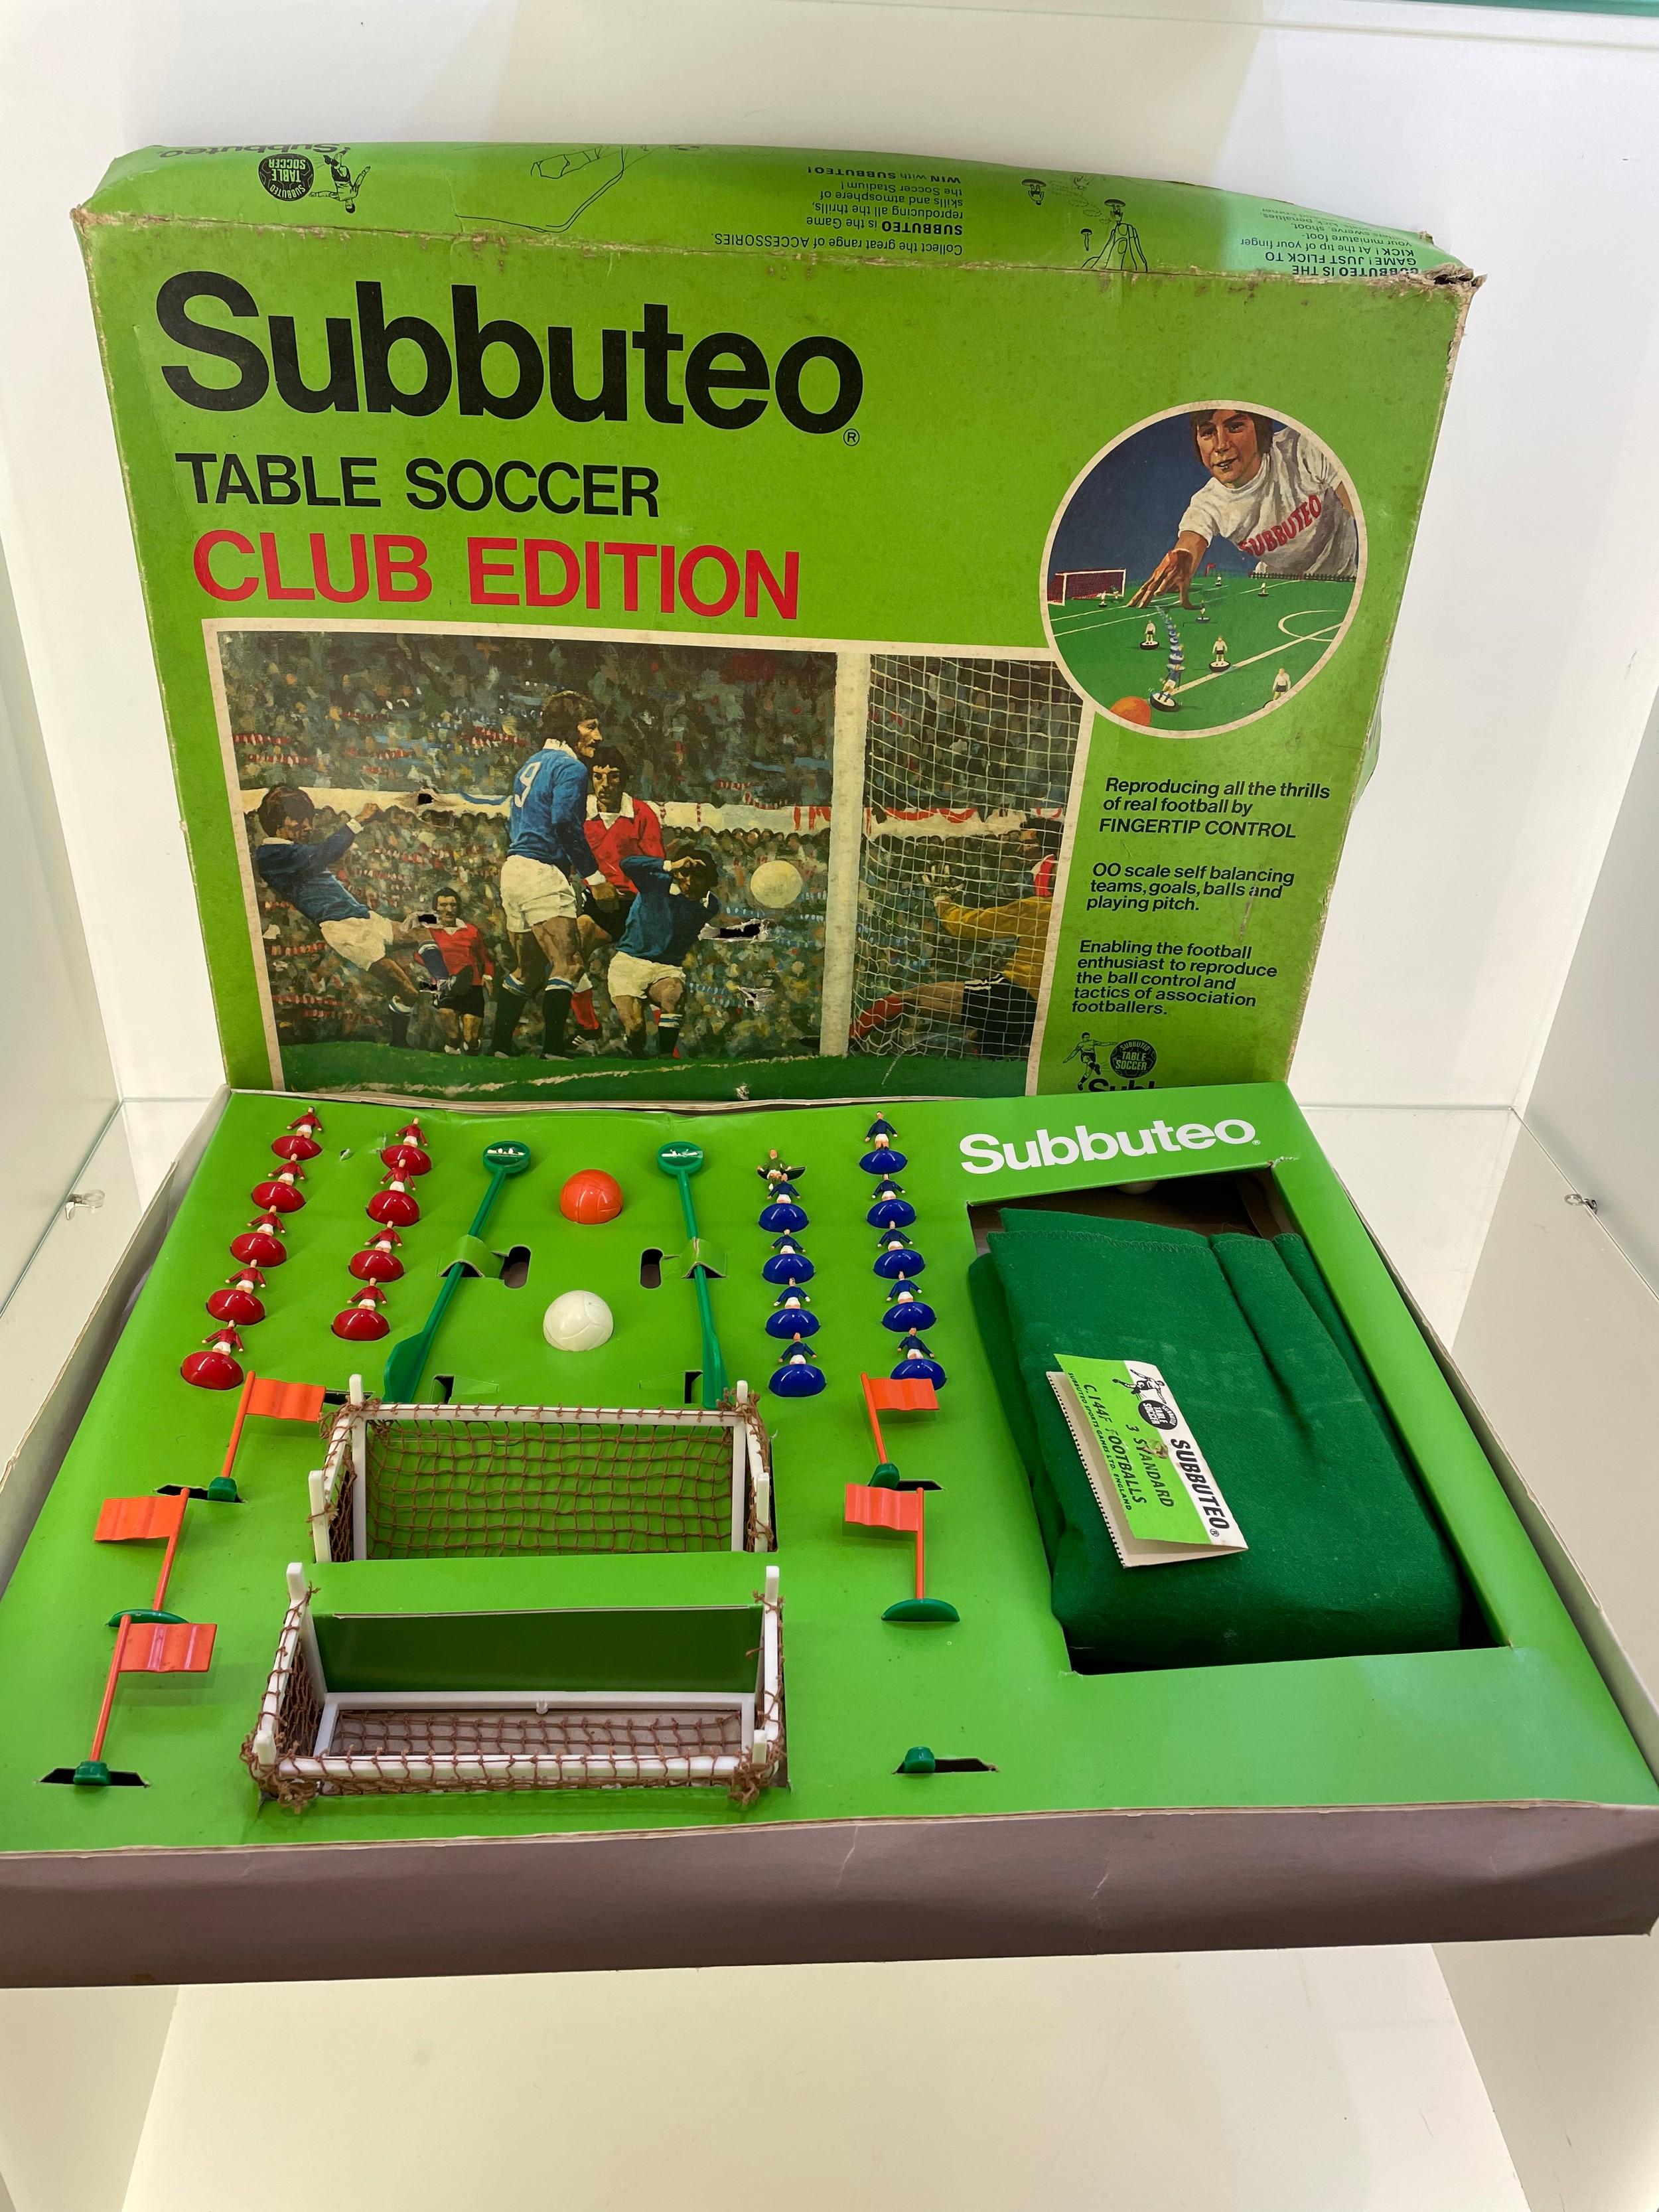 Subbuteo Table soccer club edition - Image 3 of 3